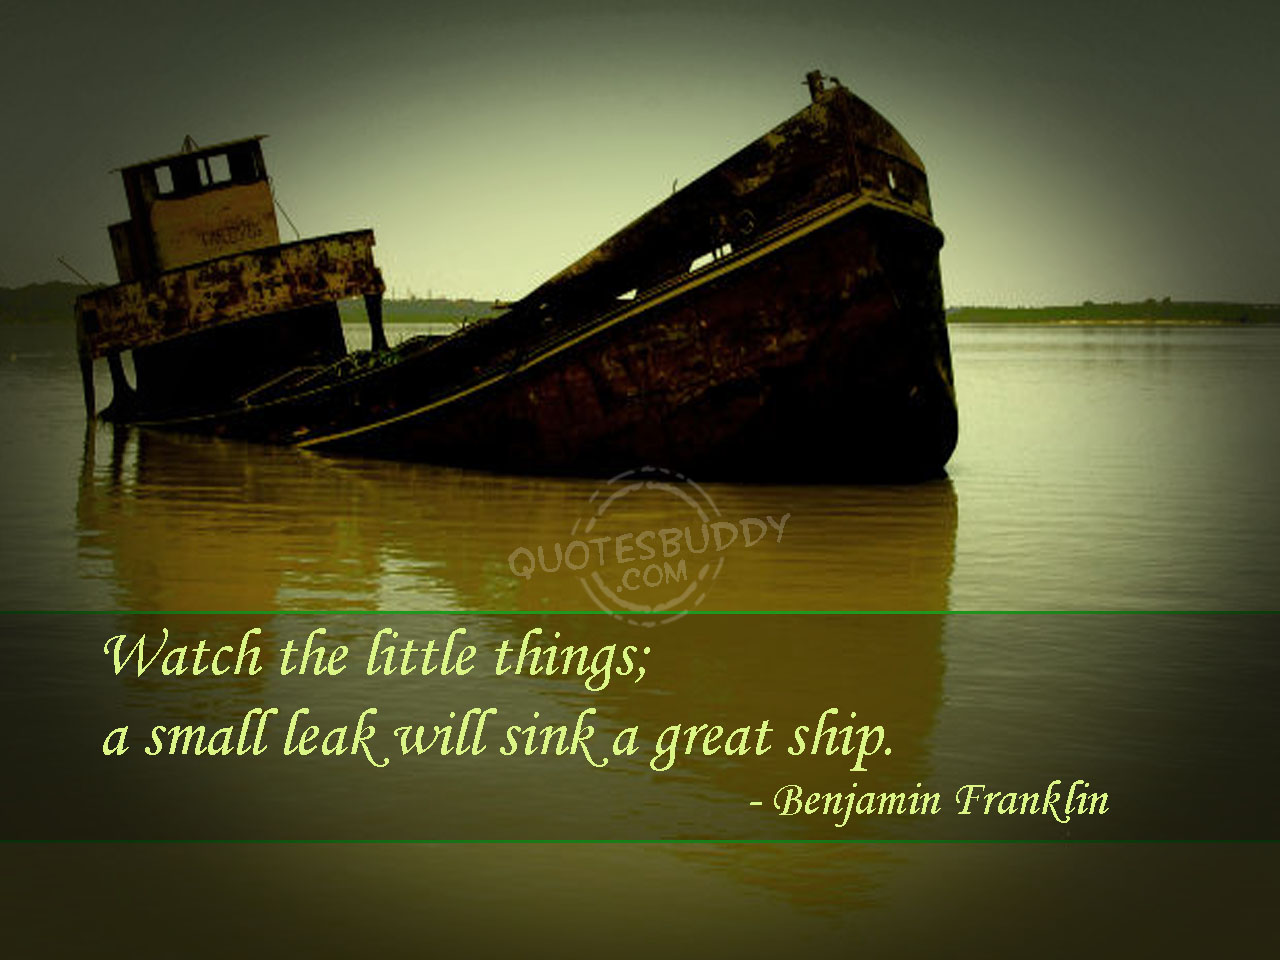 Famous Quotes Wallpaper - Small Leak Will Sink A Great Ship - HD Wallpaper 